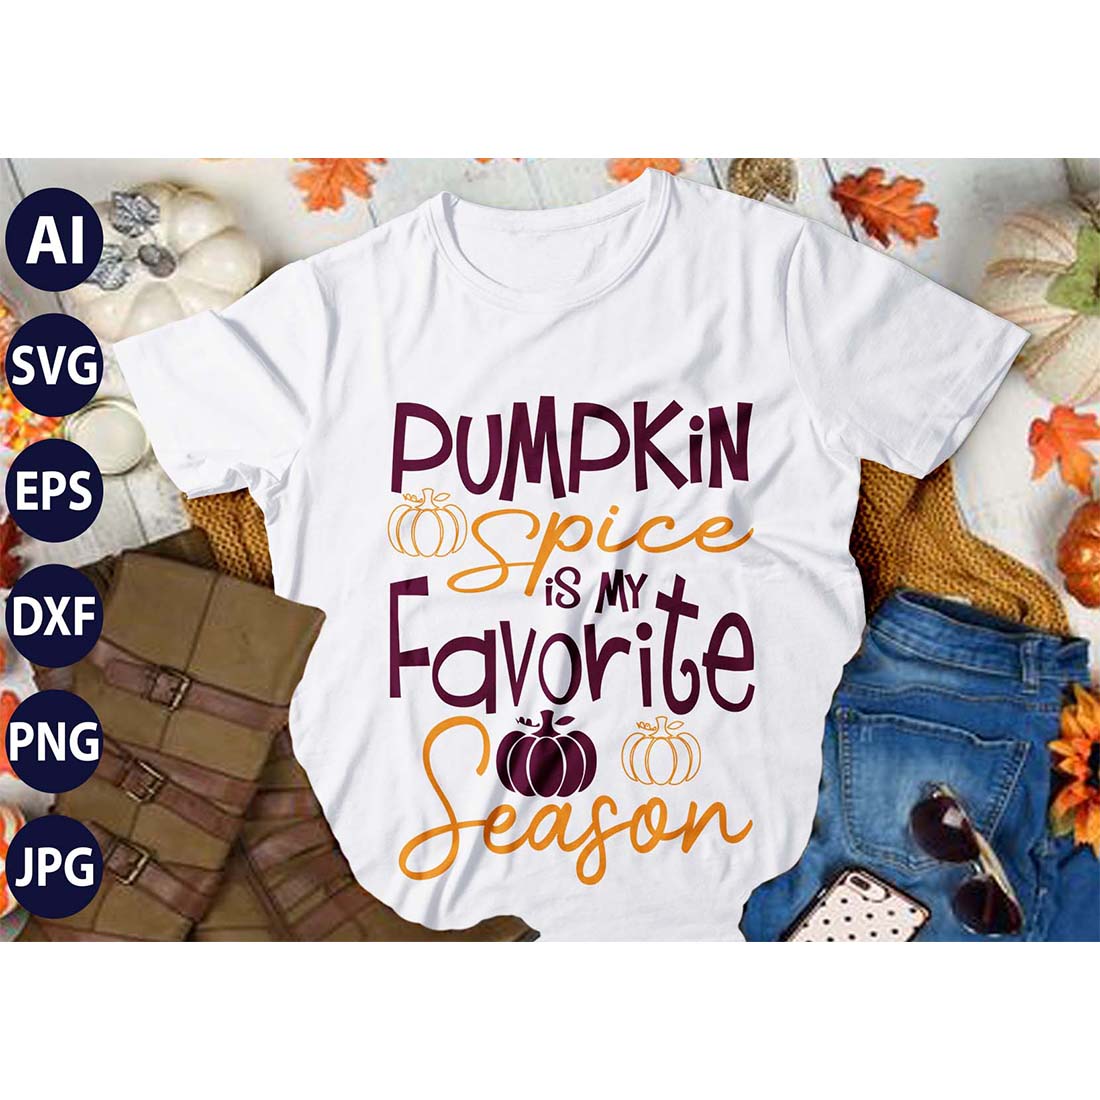 Pumpkin Spice is my Favorite Season, SVG T-Shirt Design |Happy Halloween & Pumpkin T-Shirt Design | Ai, Svg, Eps, Dxf, Jpeg, Png, Instant download T-Shirt | 100% print-ready Digital vector file cover image.